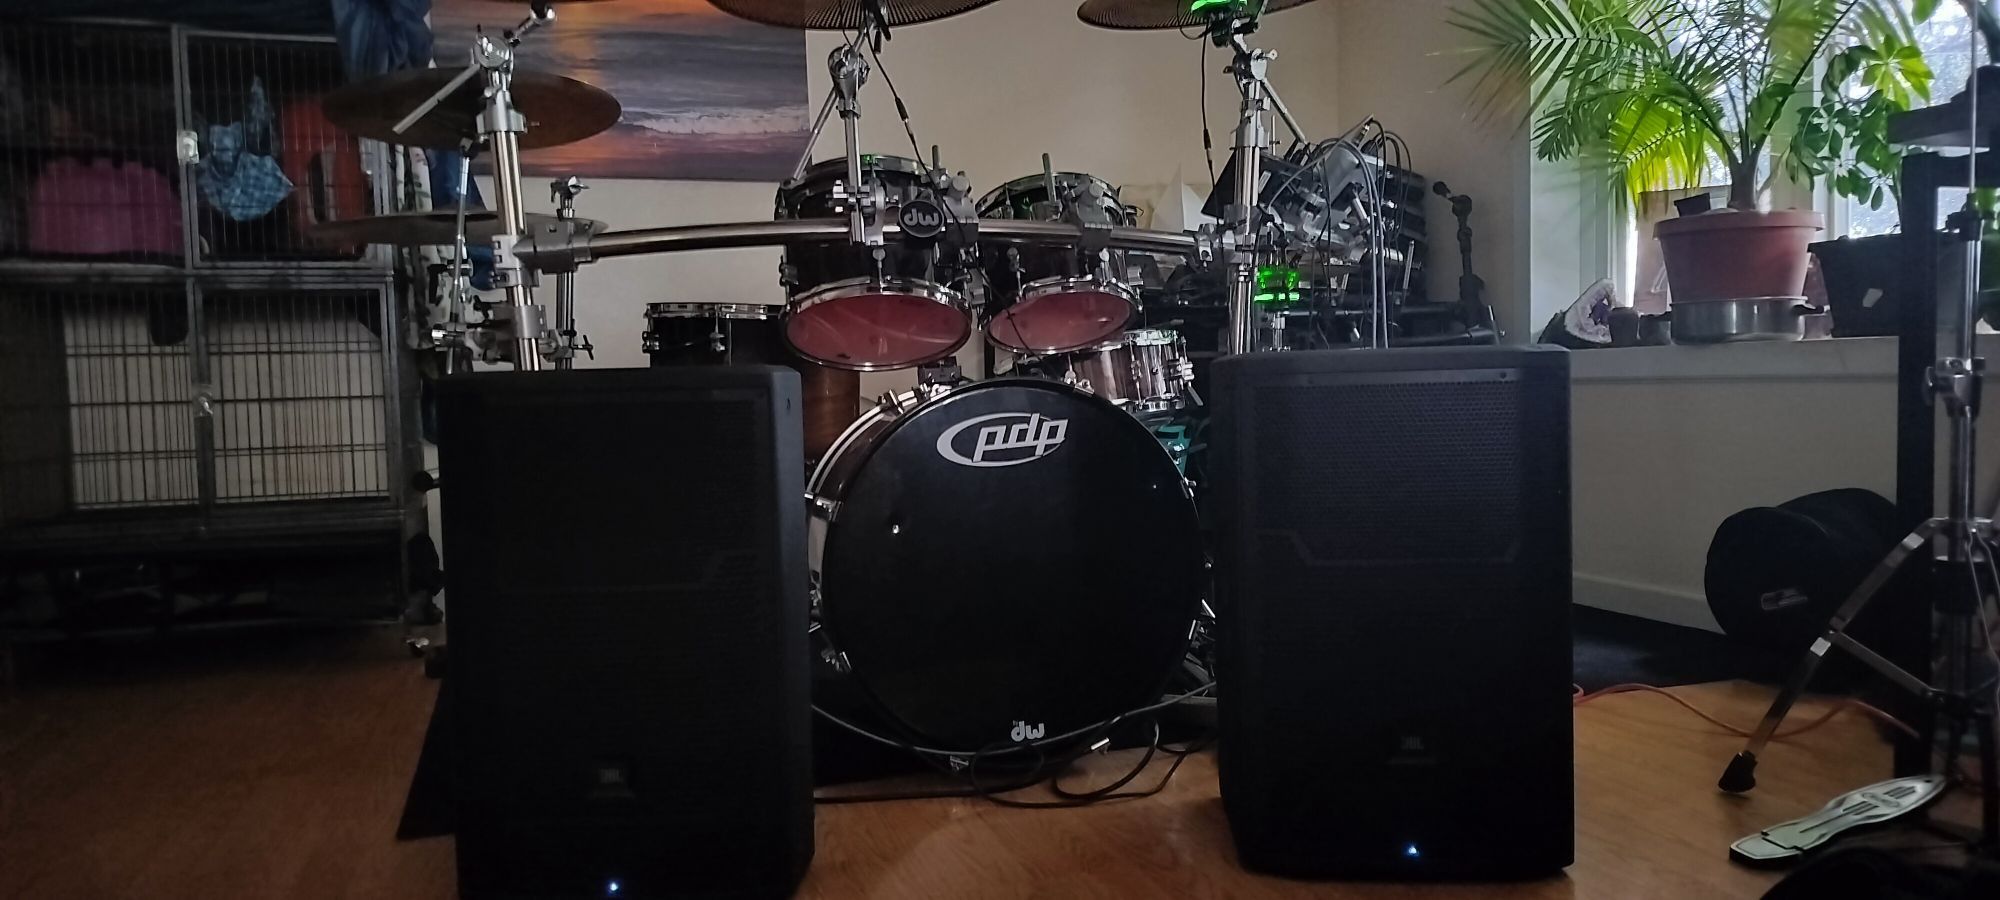 PDP 5 Piece With DW Rack, 9 Cymbals(6 Sabian 3 Zildjian, 2 JBL Amps, Yamaha EA10,Gator Drum,Cymbal And Amp Cases 